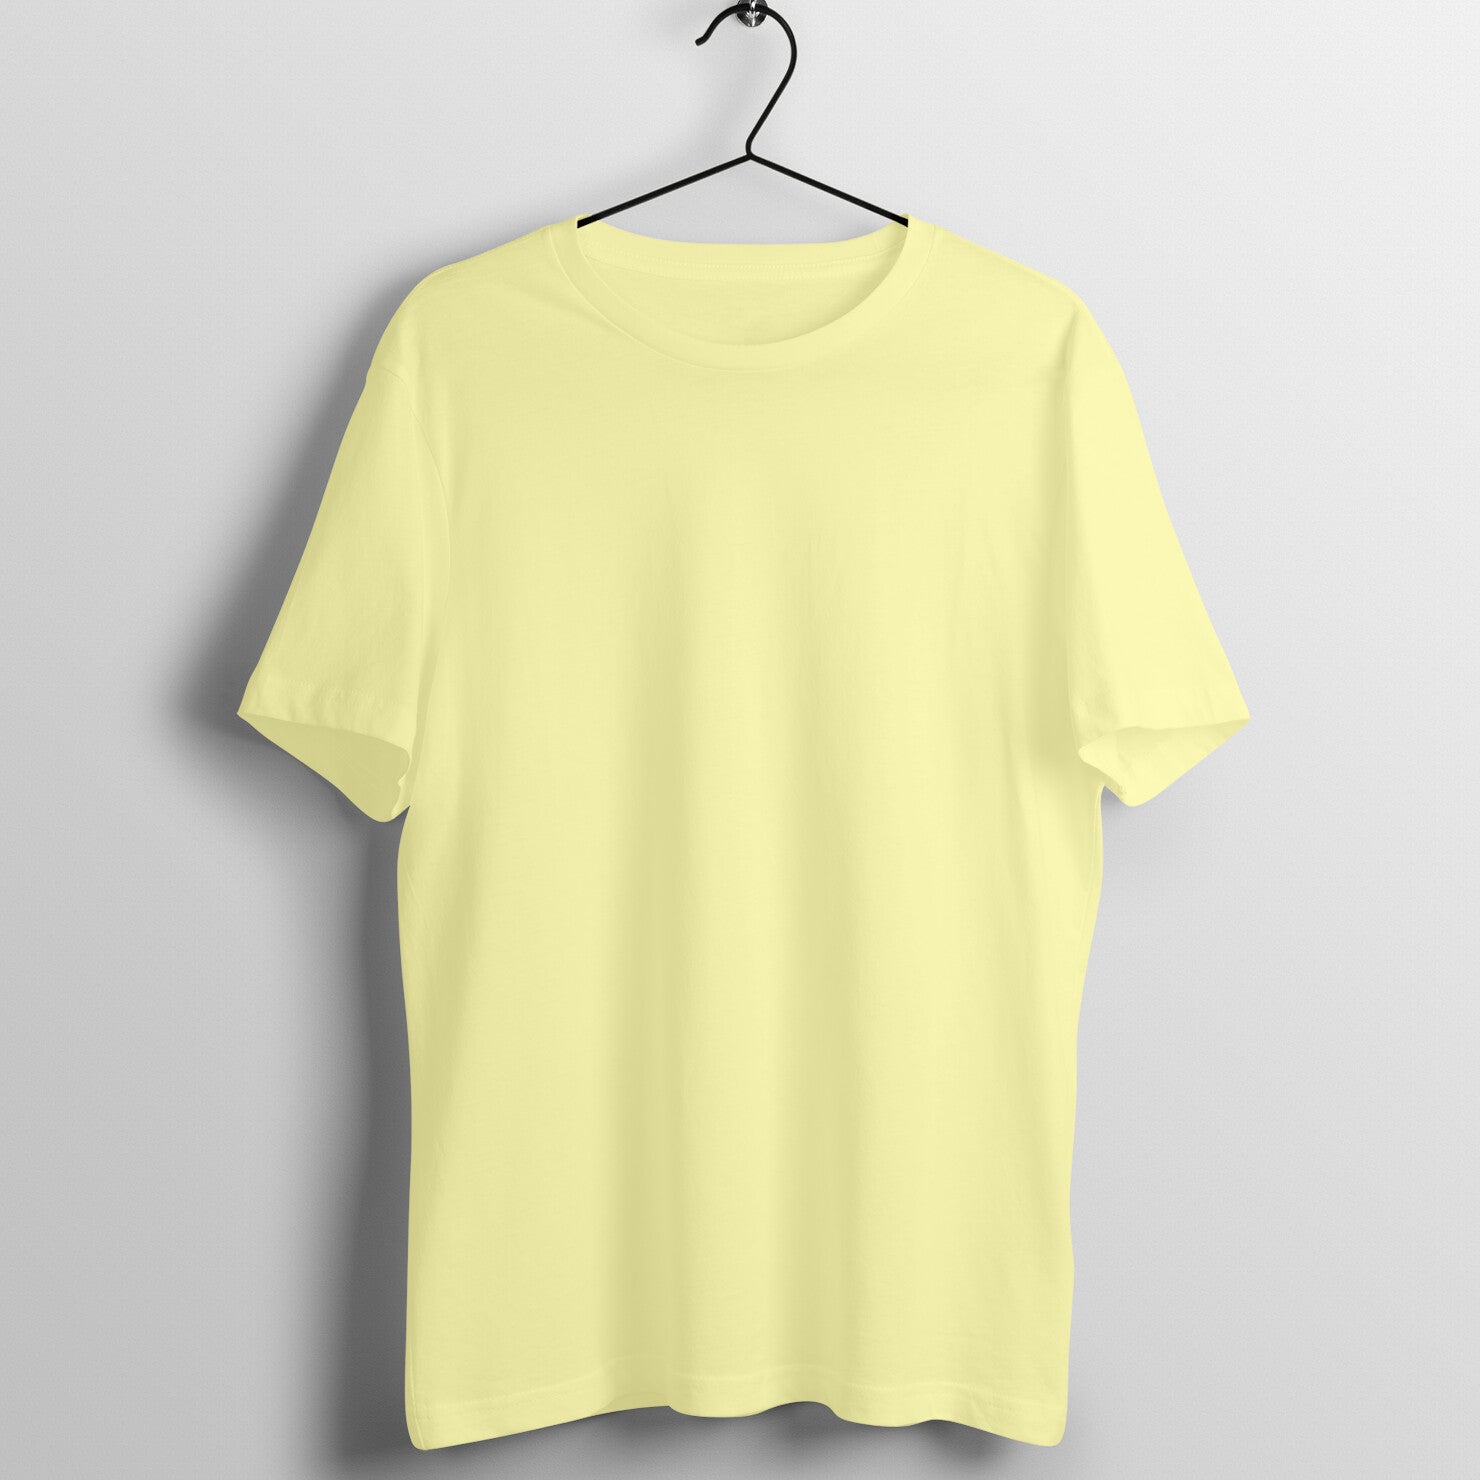 Butter Yellow Men's Tshirt - The Noodle Heads - Back Print